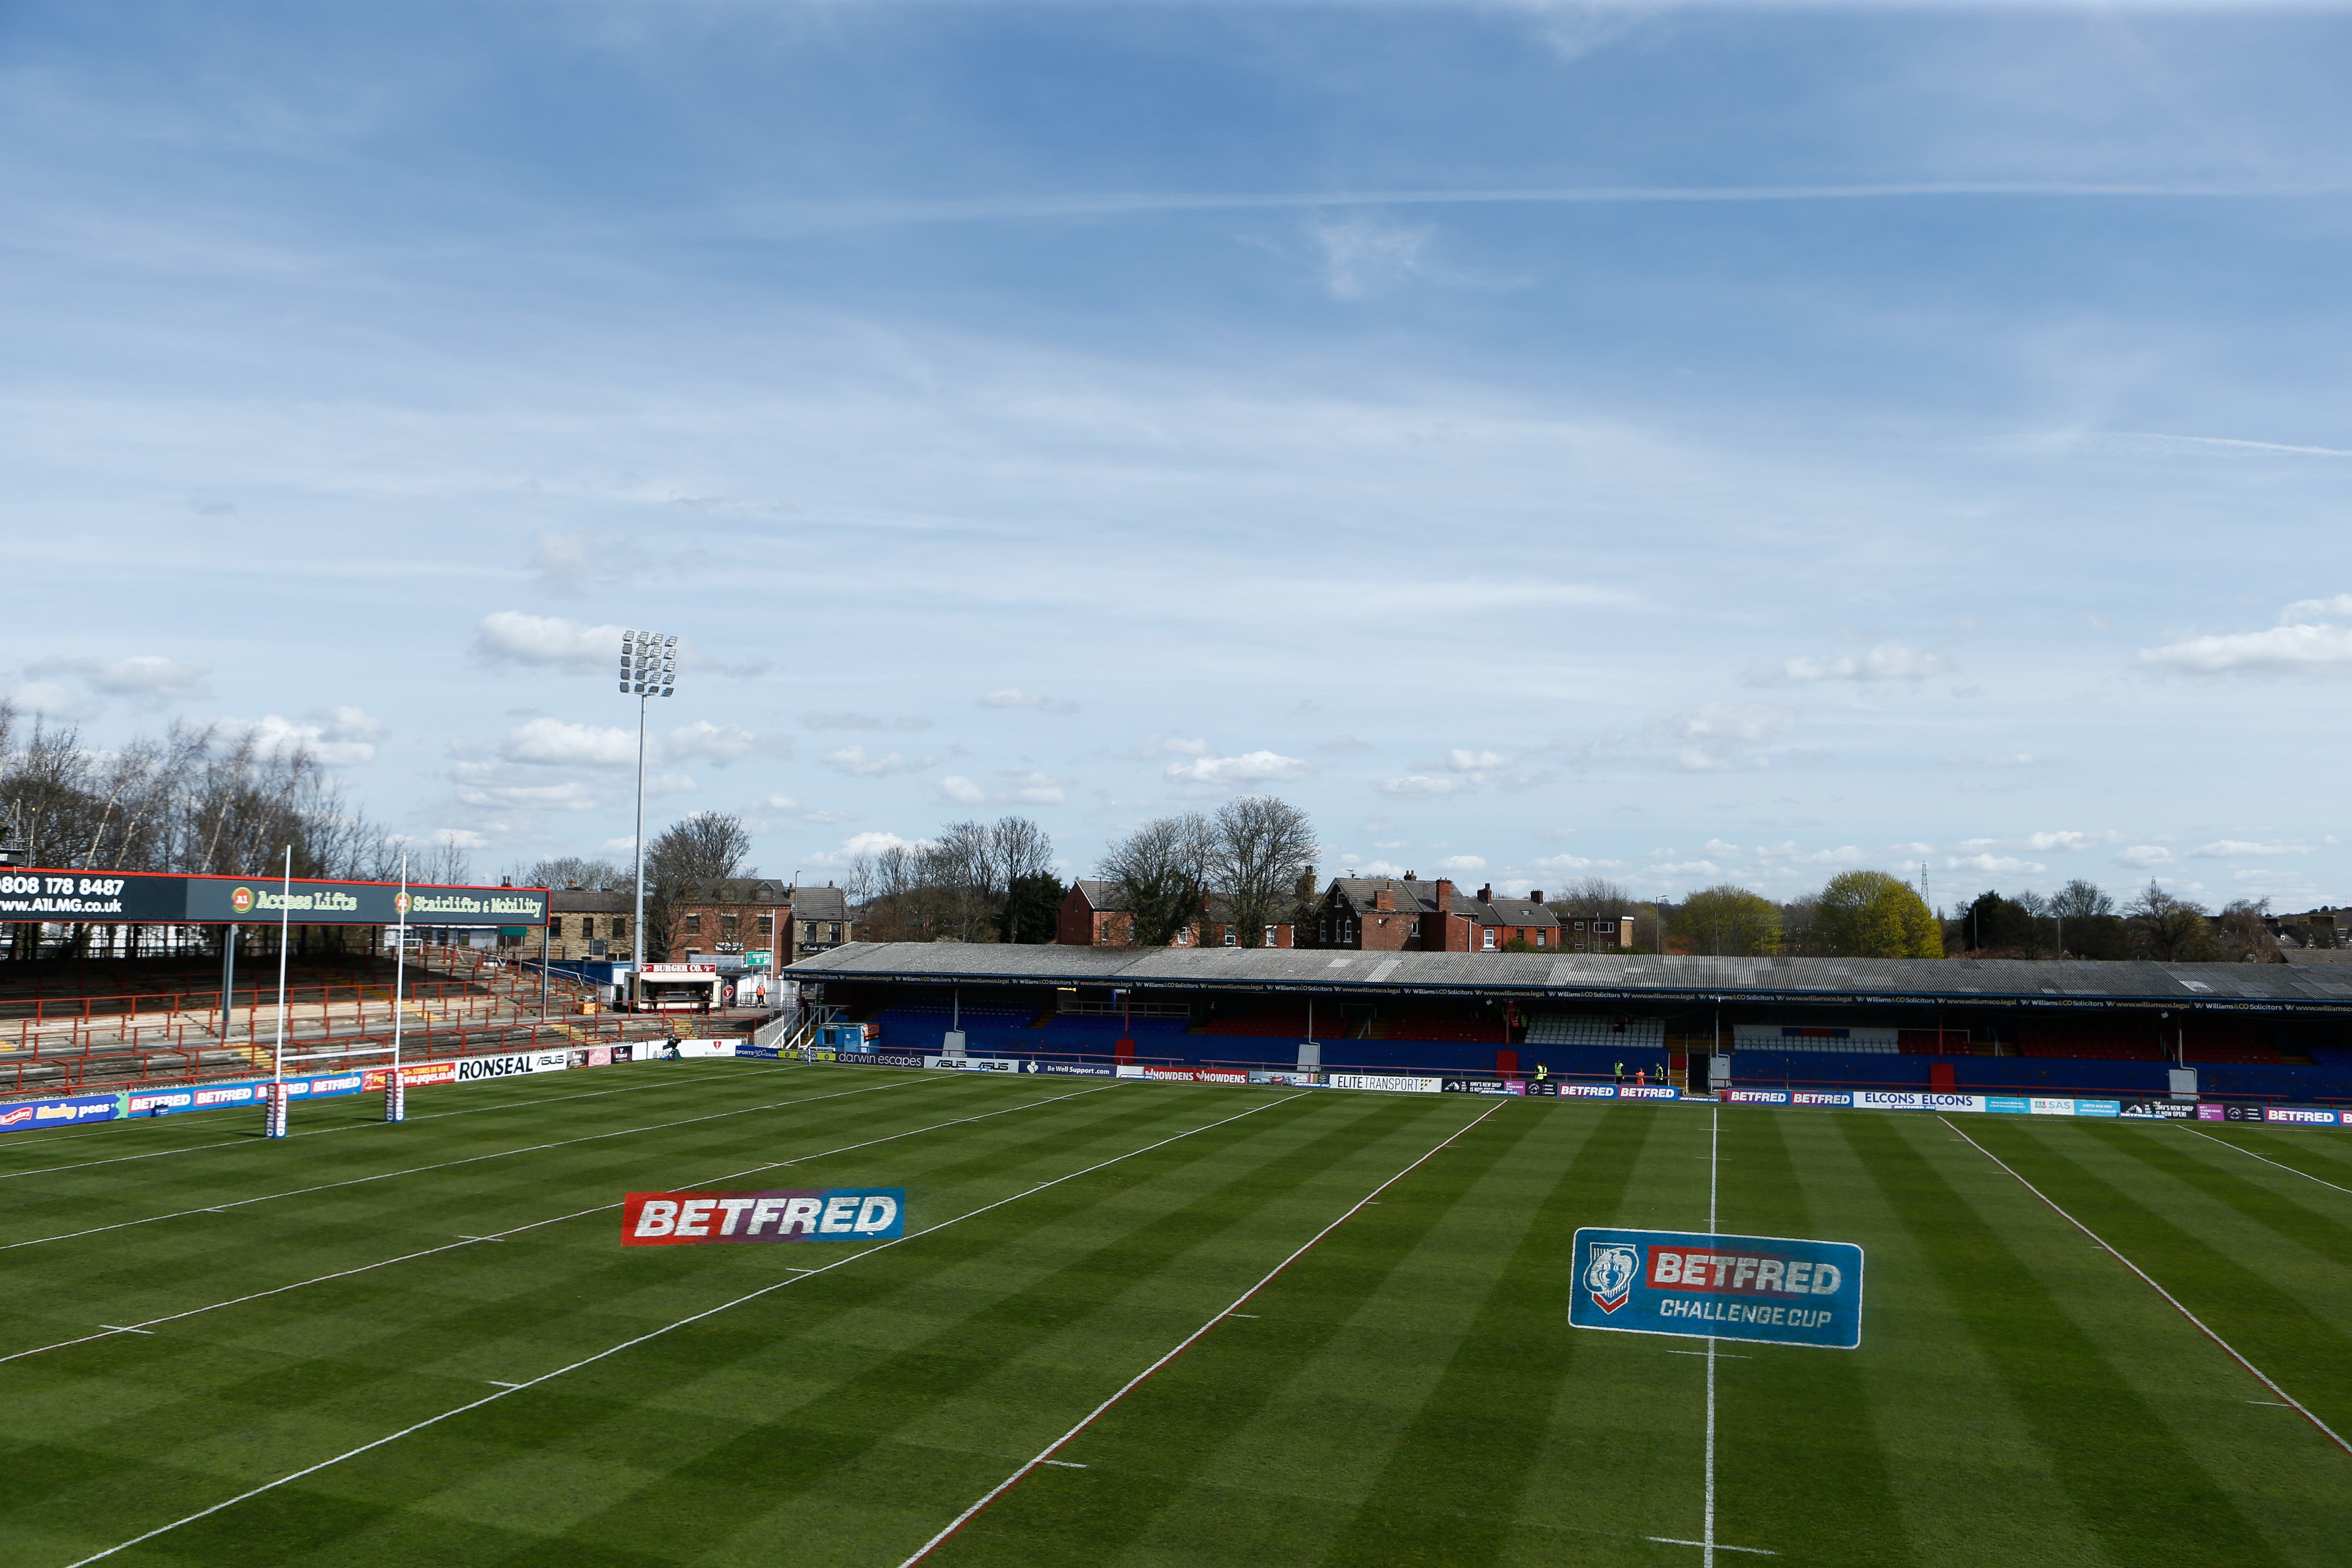 Wakefield recently started a £12m overhaul of their historic Belle Vue stadium